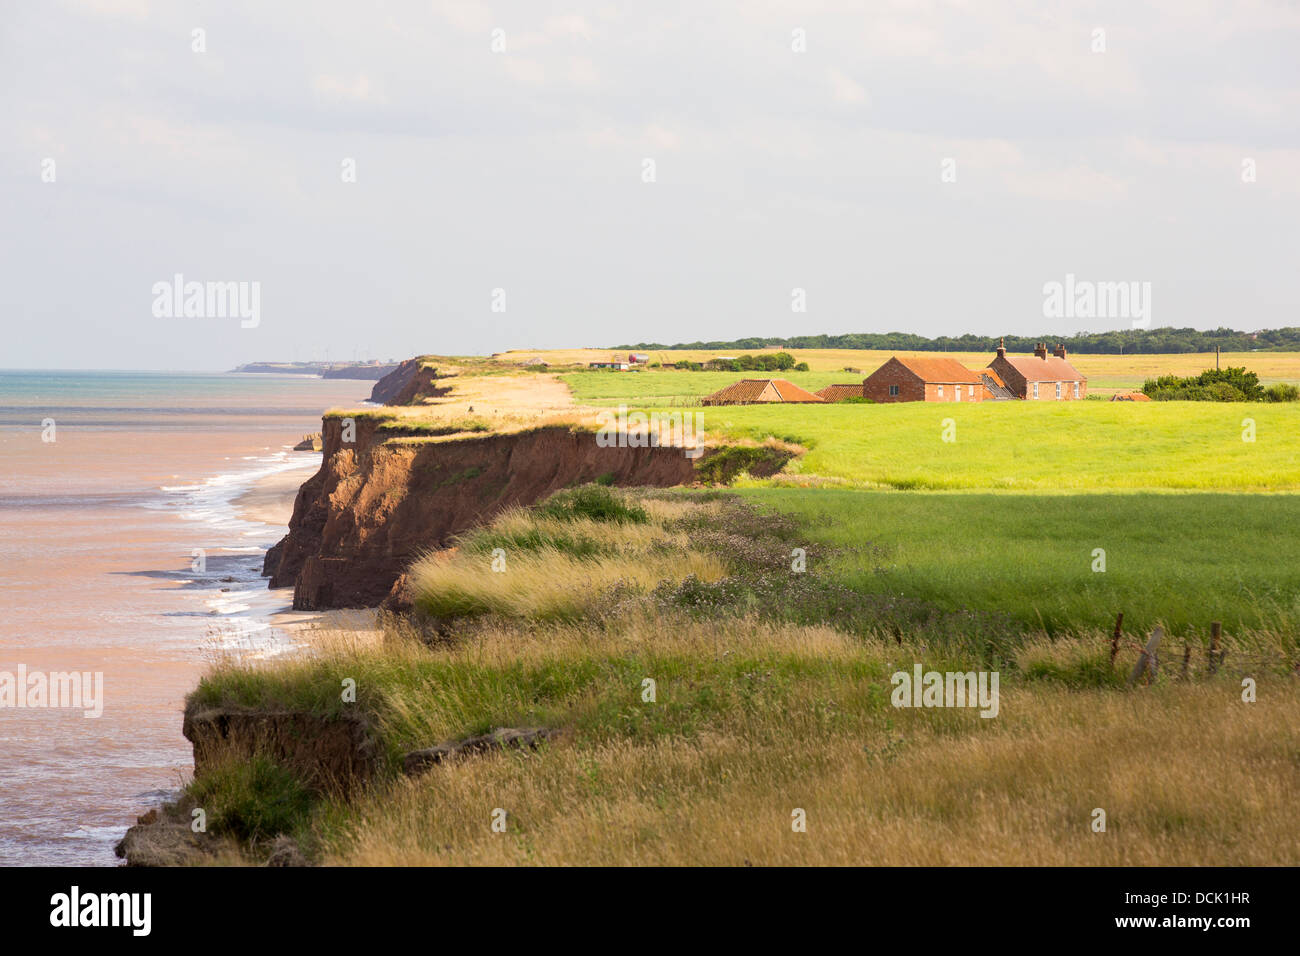 A farm house near the edge of collapsing coastal cliffs at Aldbrough on Yorkshires East Coast, UK. Stock Photo